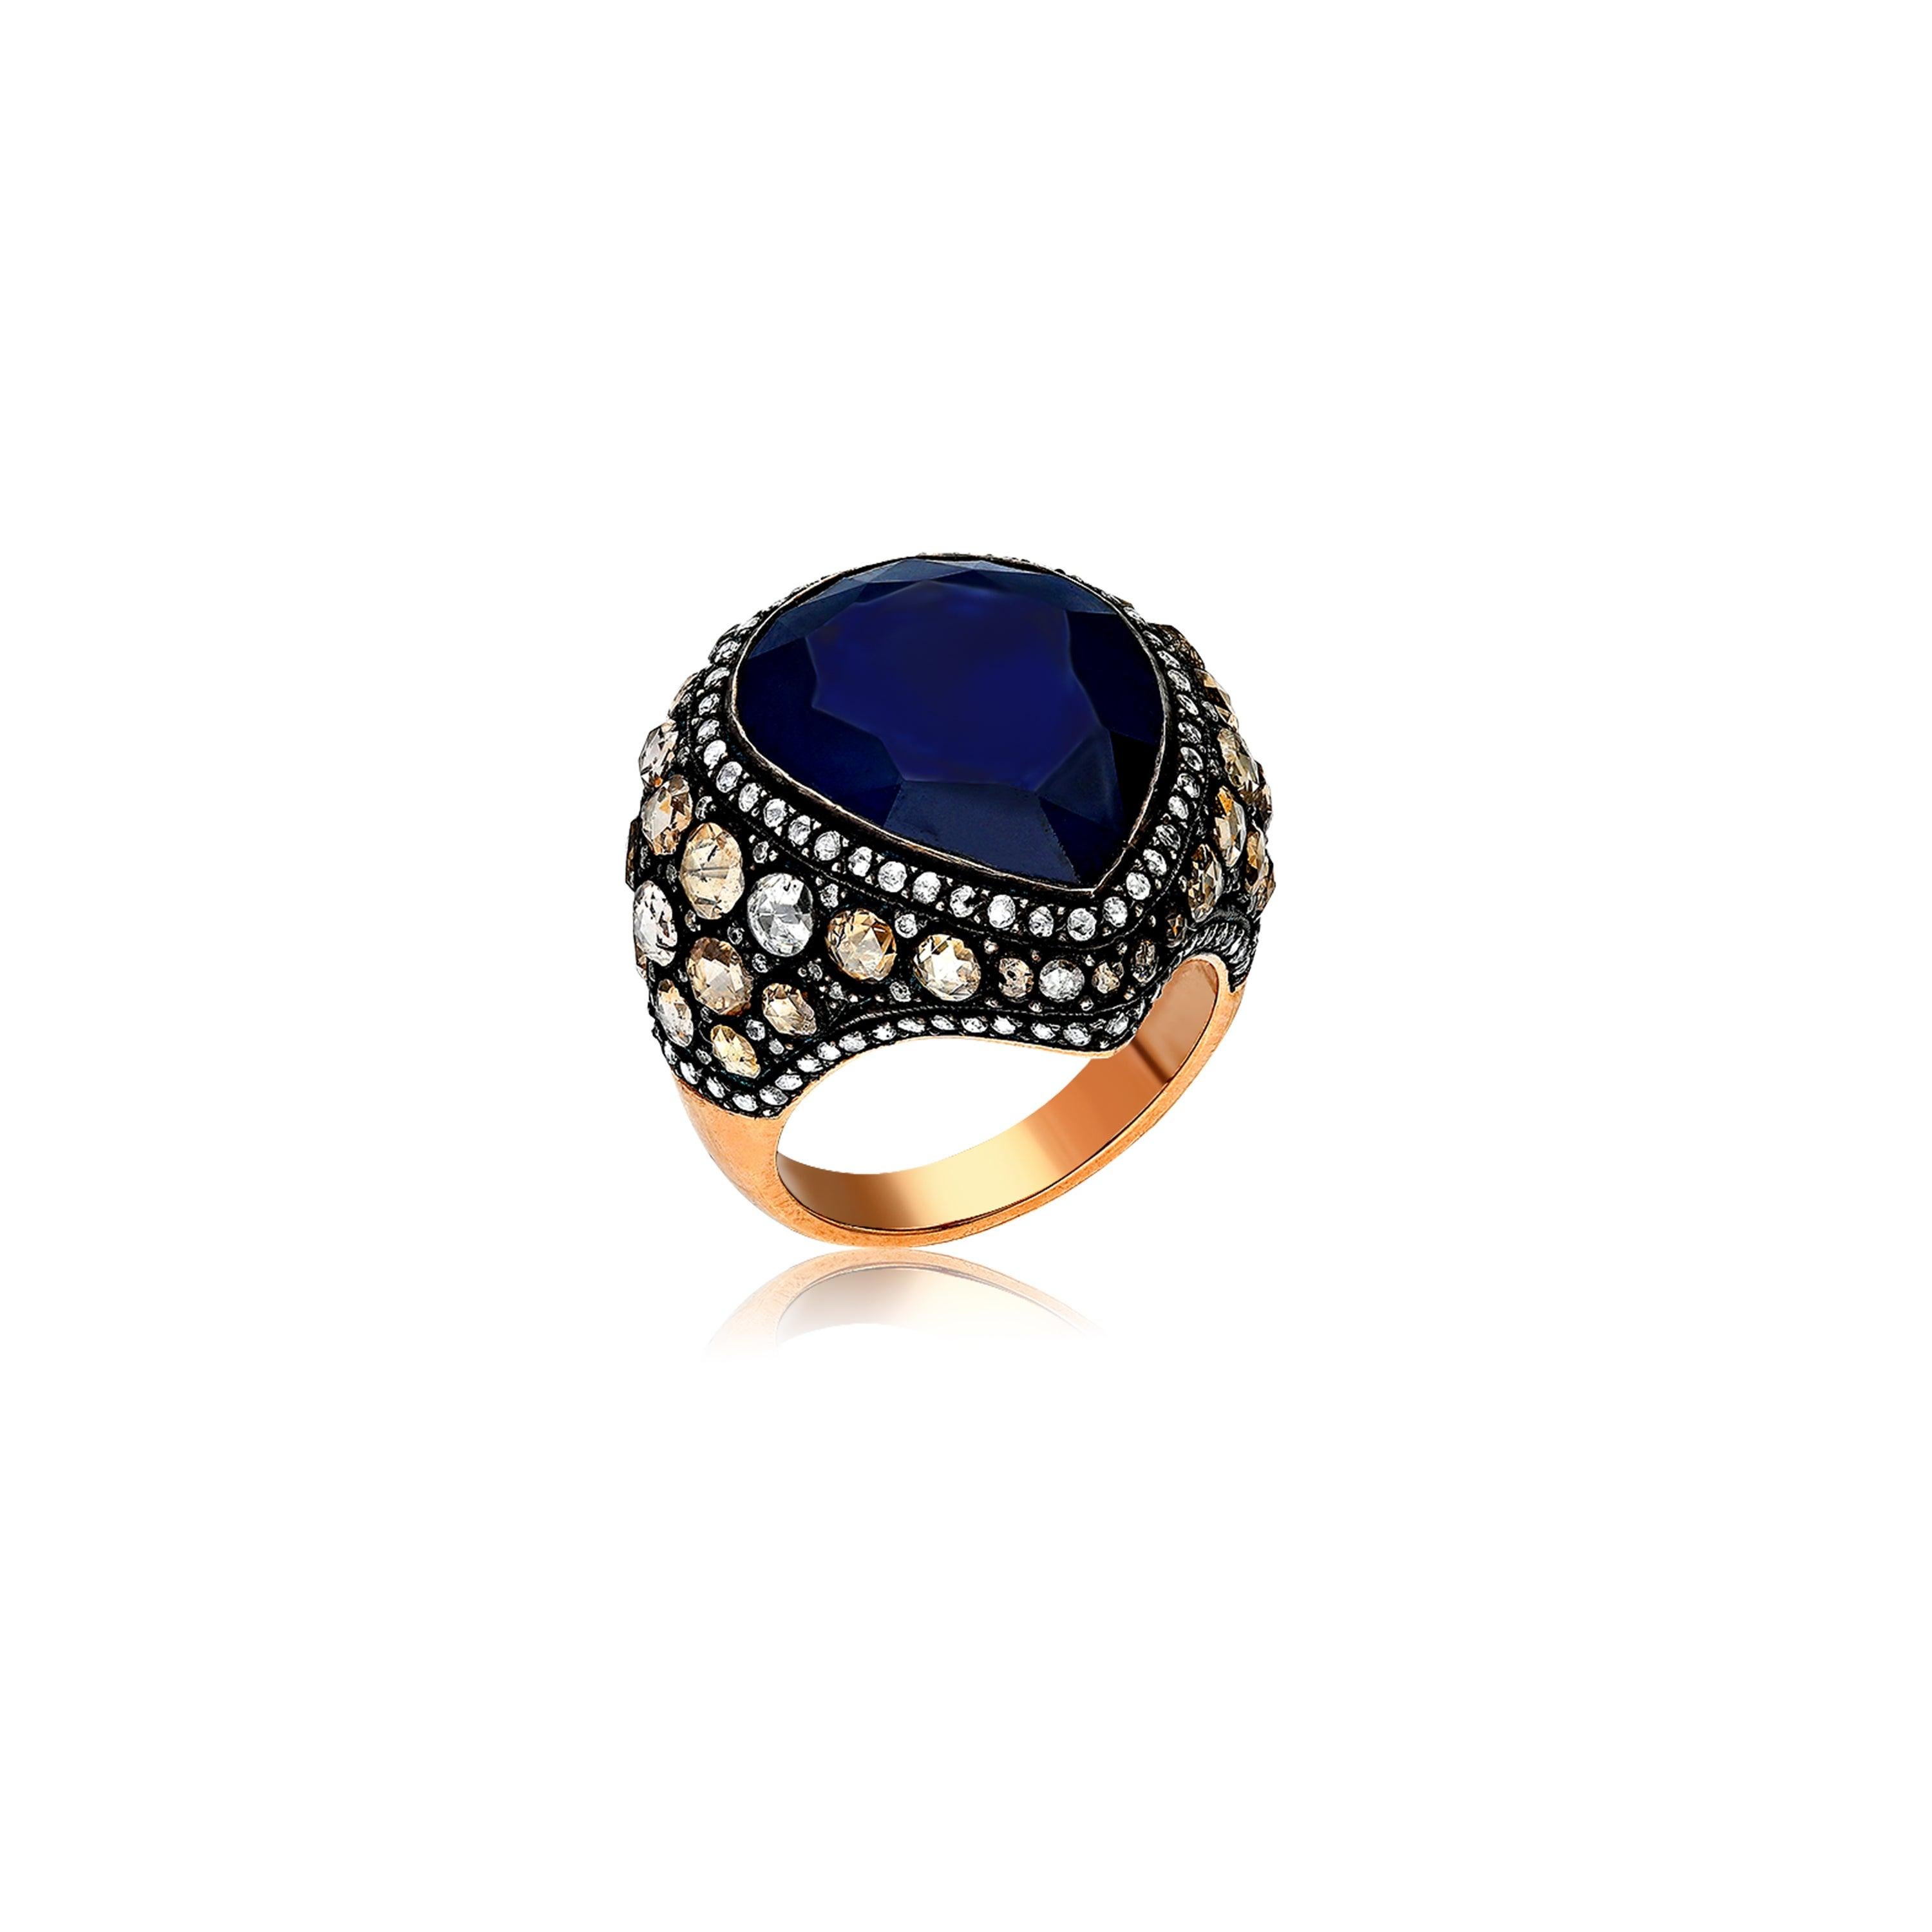 For Sale:  8K Gold and Silver Cocktail Ring with a Sapphire and White Rose Cut Diamonds 4